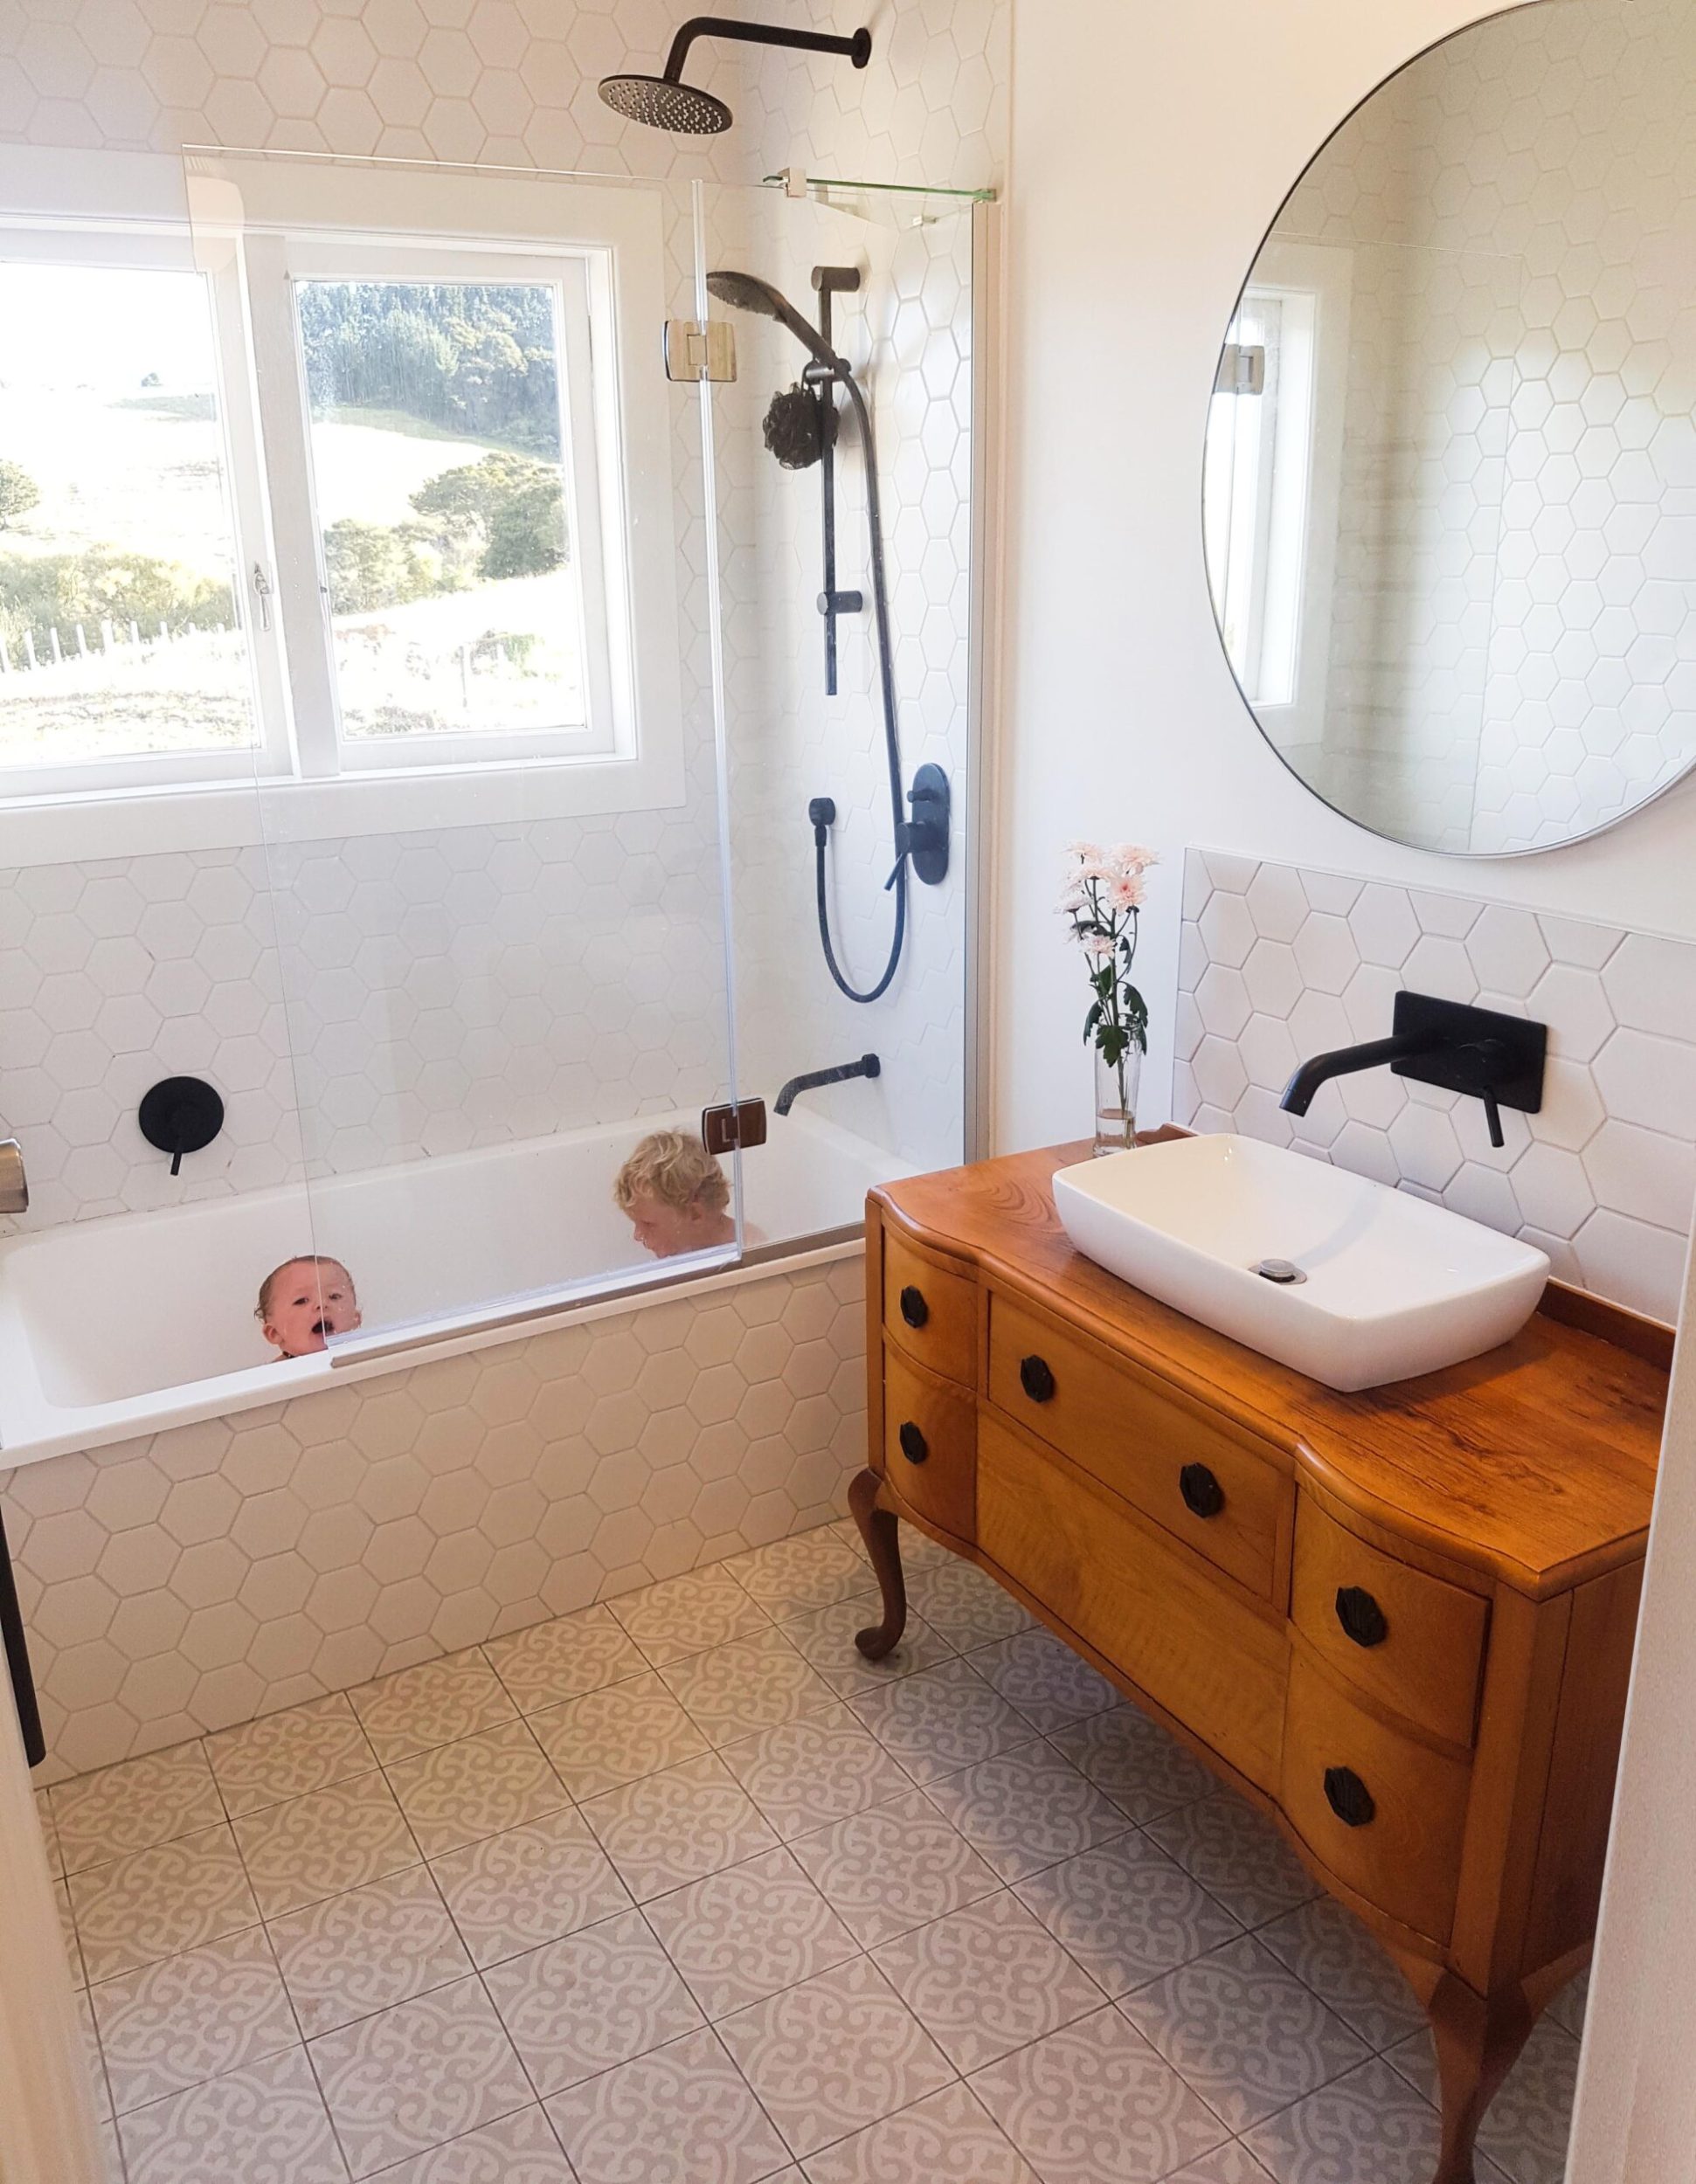 A bathroom with a large round mirror and sink vanity made out of a upcycled wood dresser